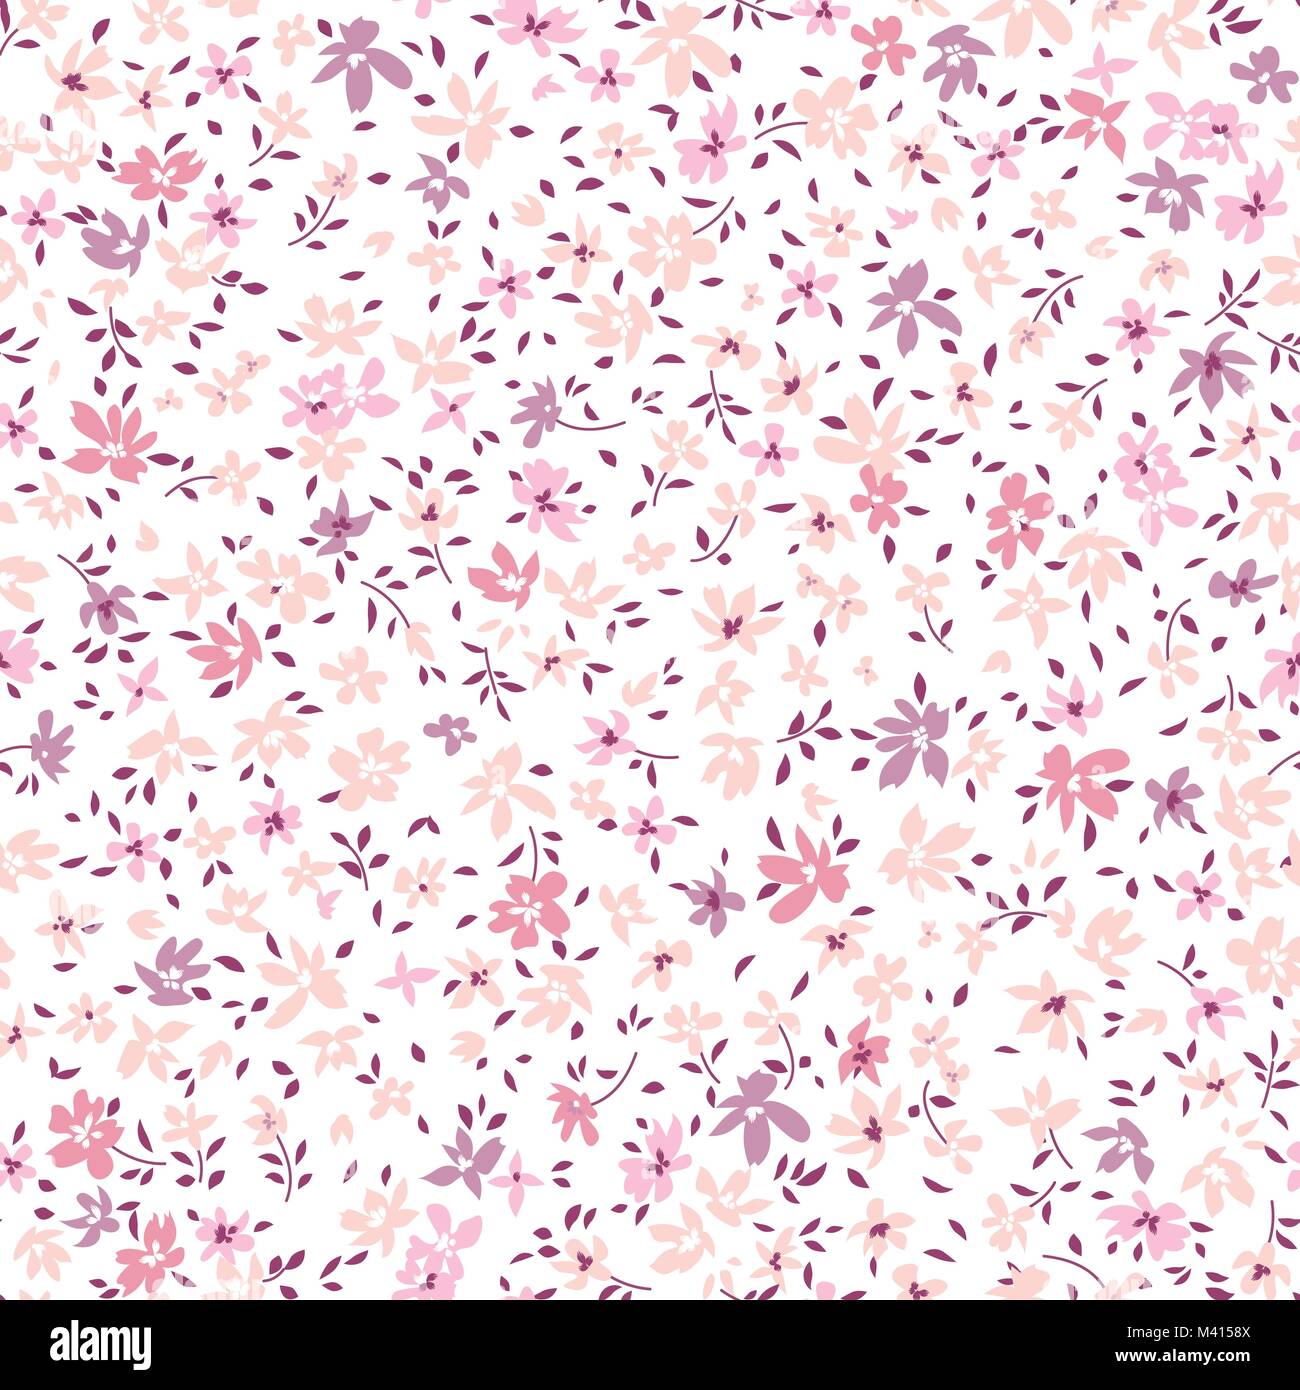 Floral seamless pattern. Flower background. Flourish ornamental summer wallpaper with flowers. Stock Vector